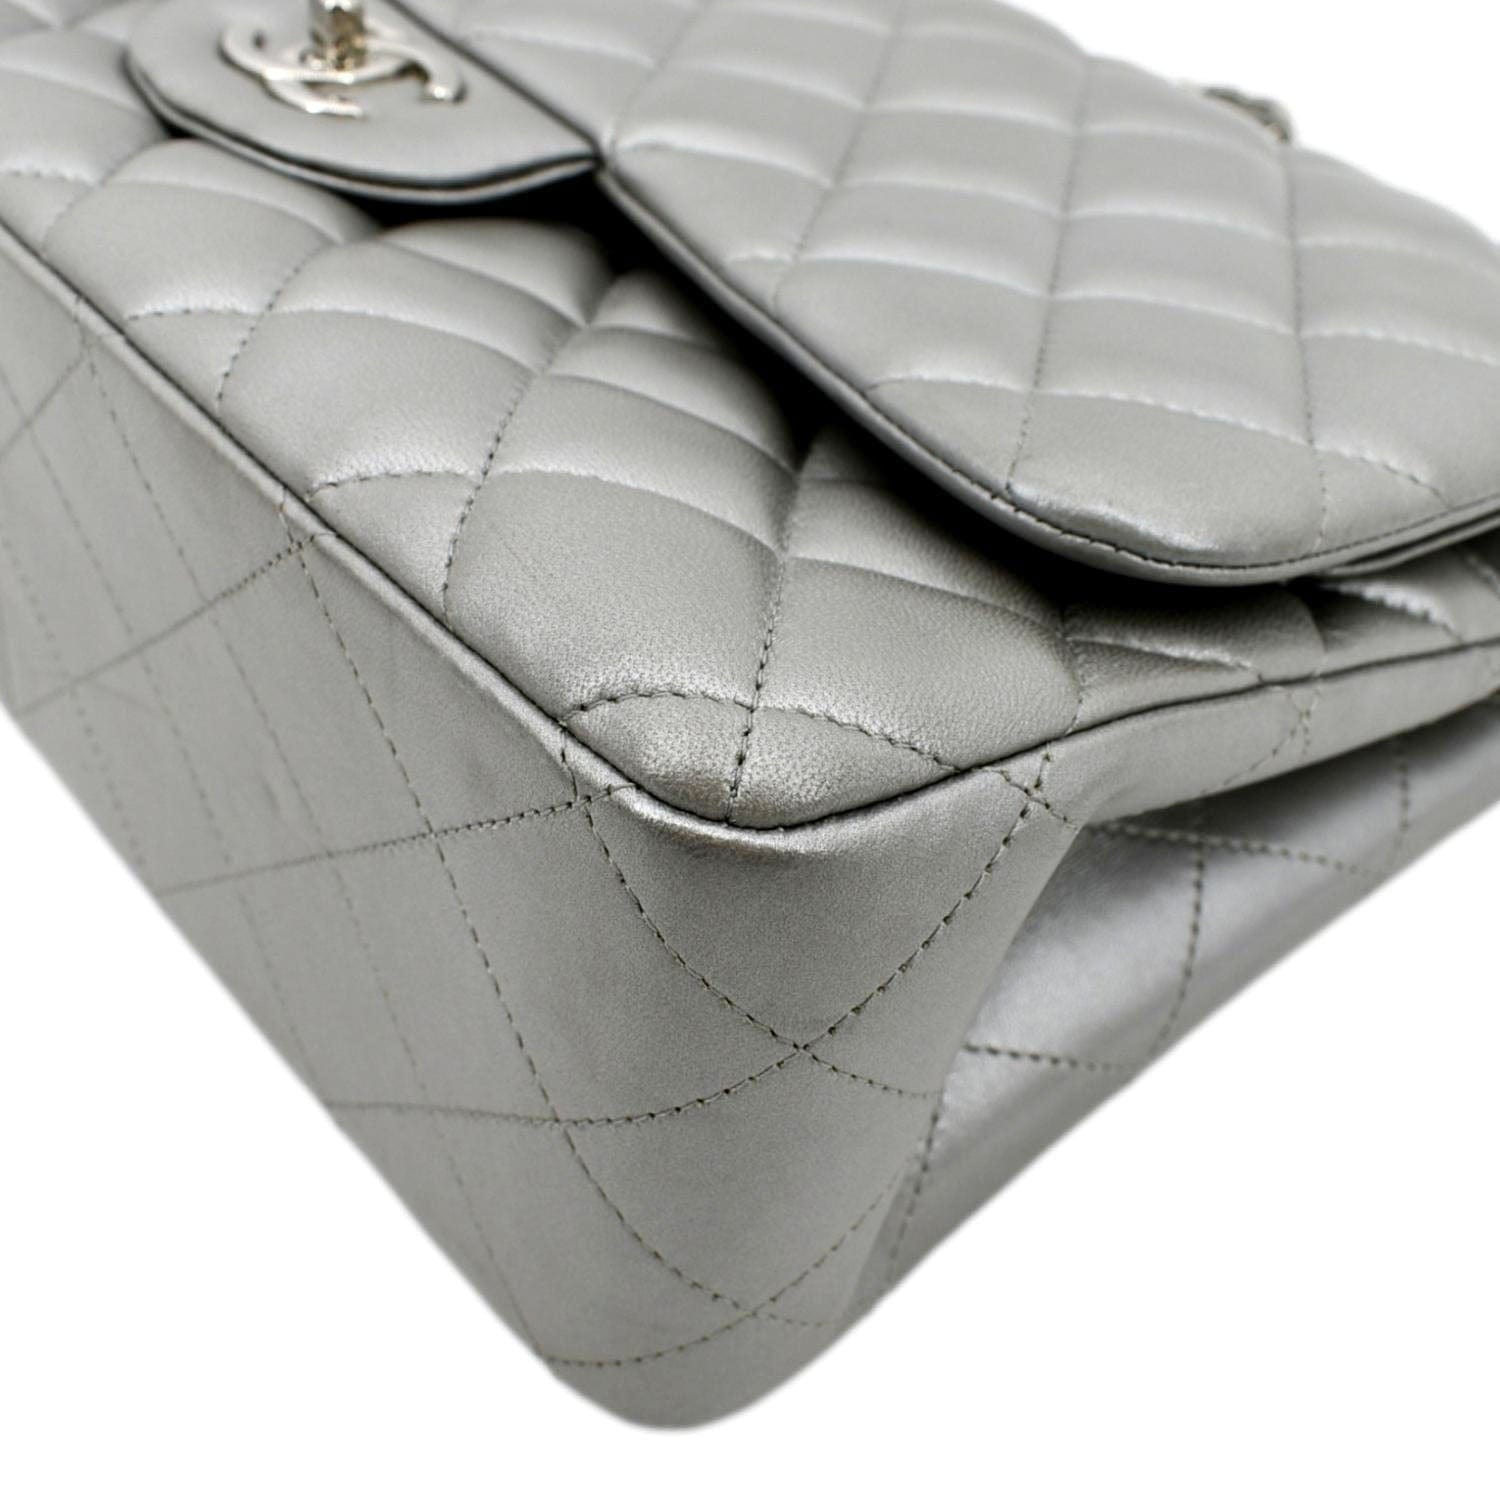 CHANEL, Bags, Chanel Luxe Metallic Sliver Flap Bag